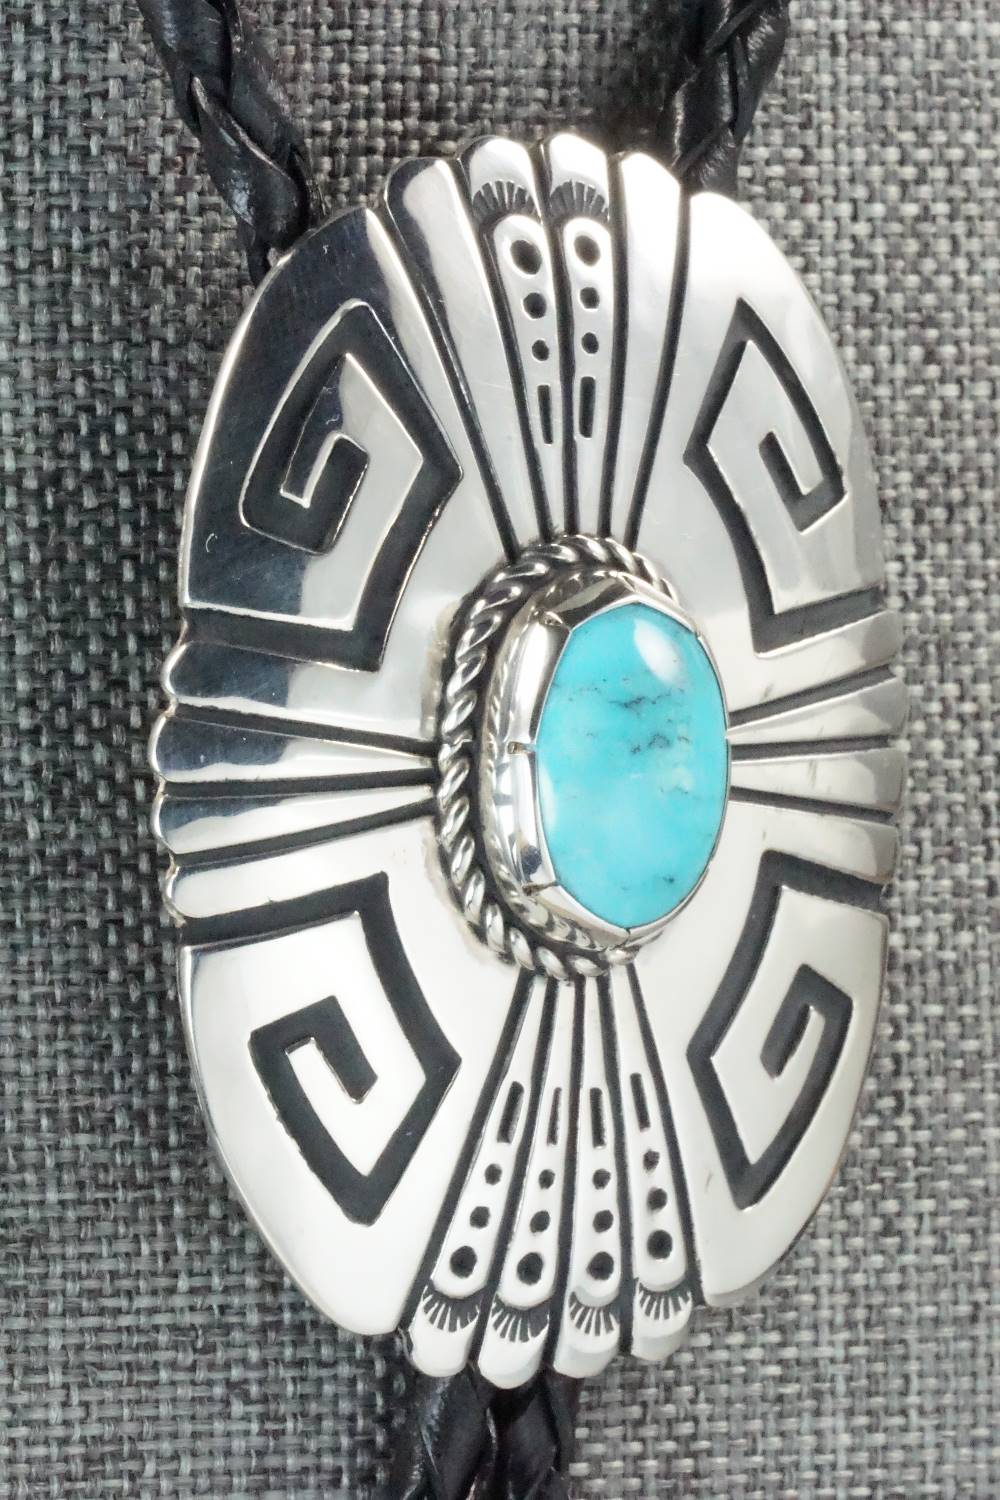 Turquoise & Sterling Silver Bolo Tie - Rosita Singer